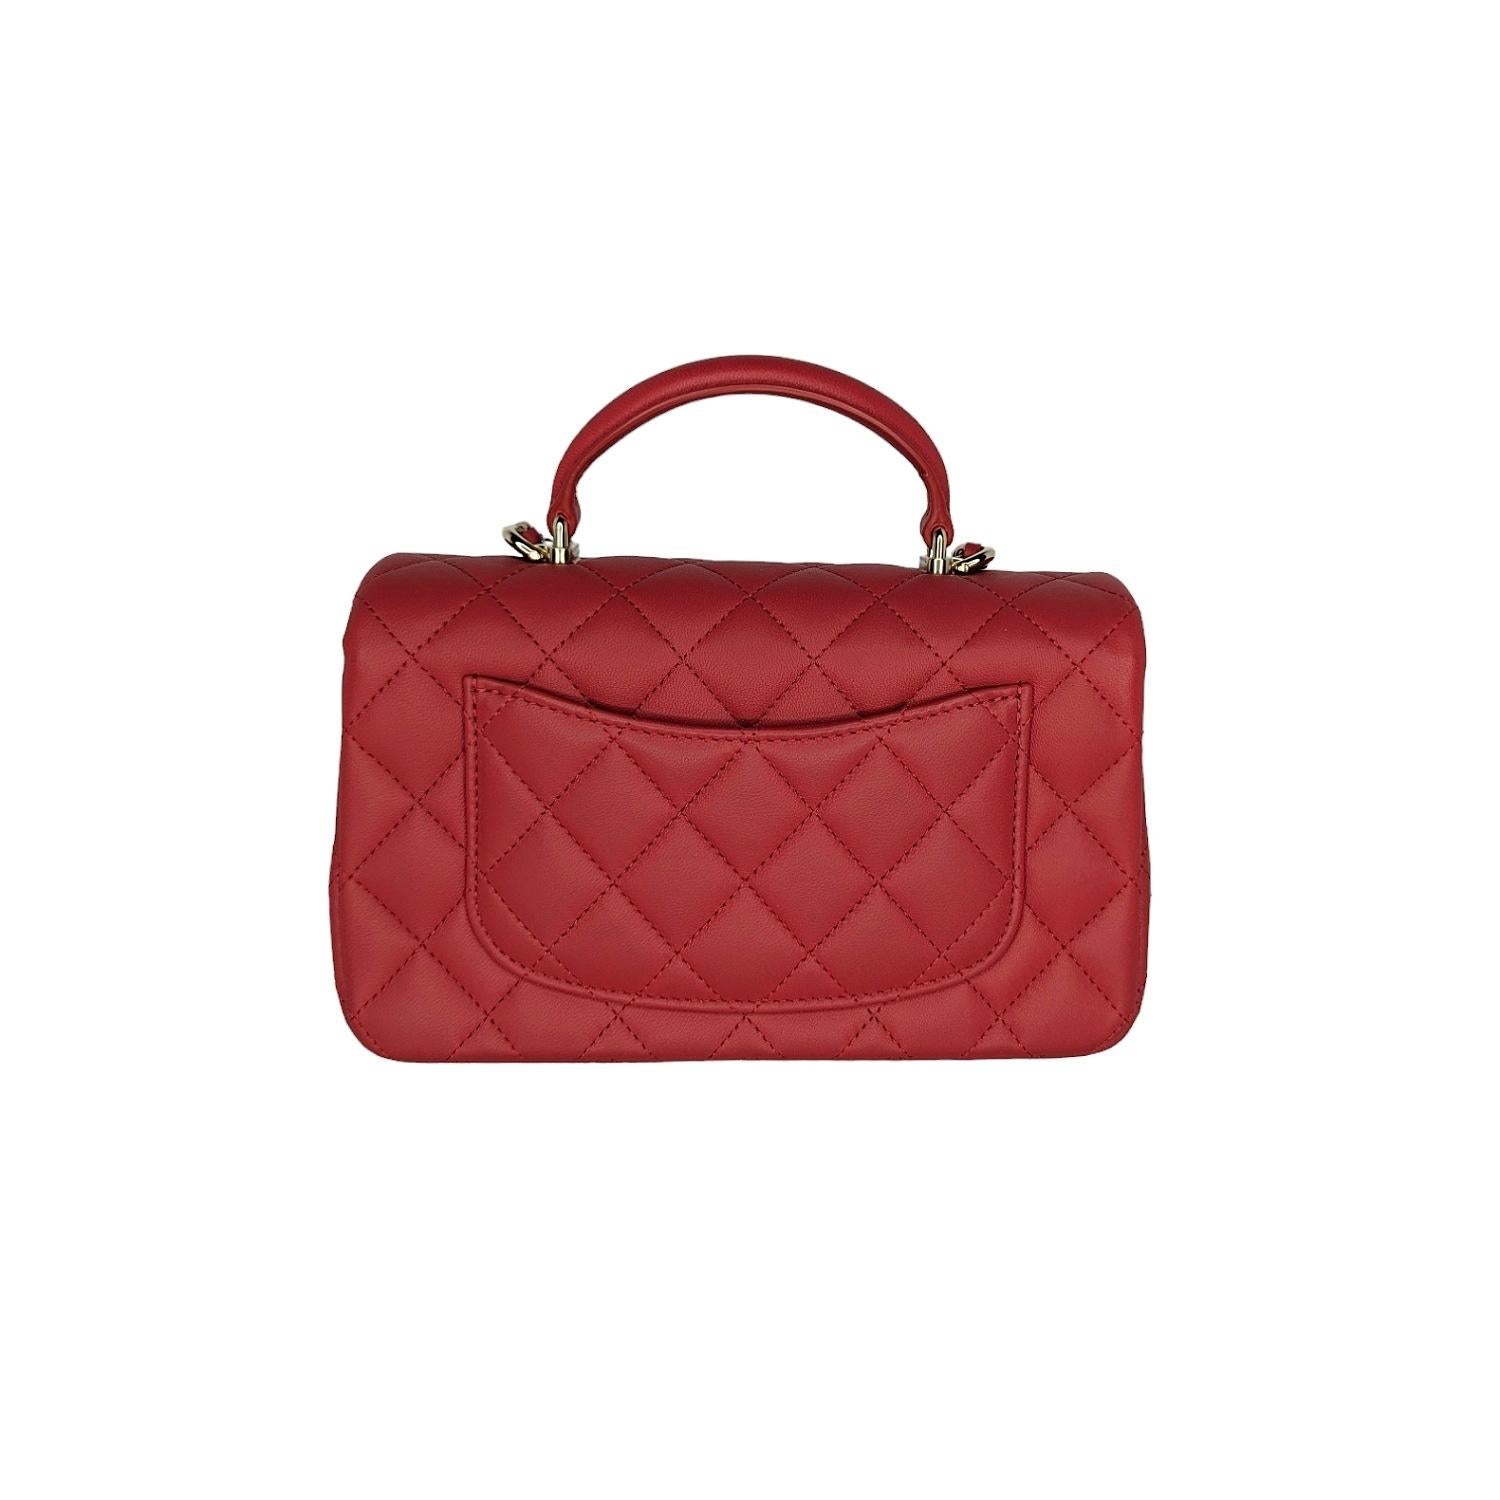 This stunning Chanel mini flap top handle bag is a timeless and chic accessory that is perfect for any occasion. The bag is crafted from luxurious lambskin leather in a beautiful red color. The bag features a leather top handle, a gold chain link